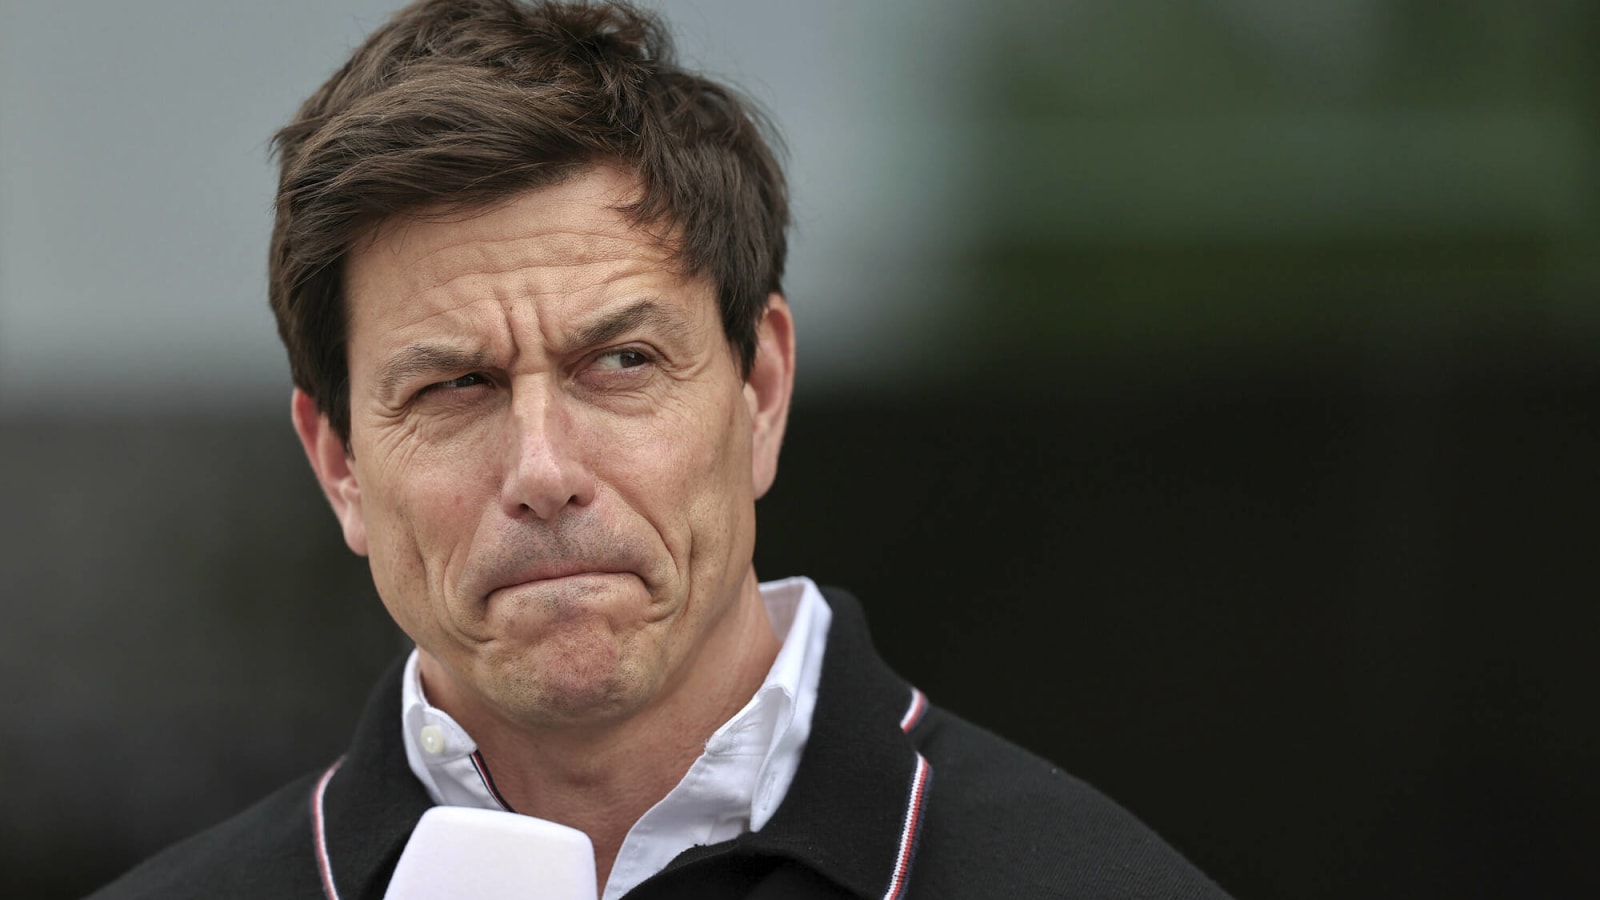 Toto Wolff breaks silence on Christian Horner’s claim of 220 Mercedes engineers working for Red Bull